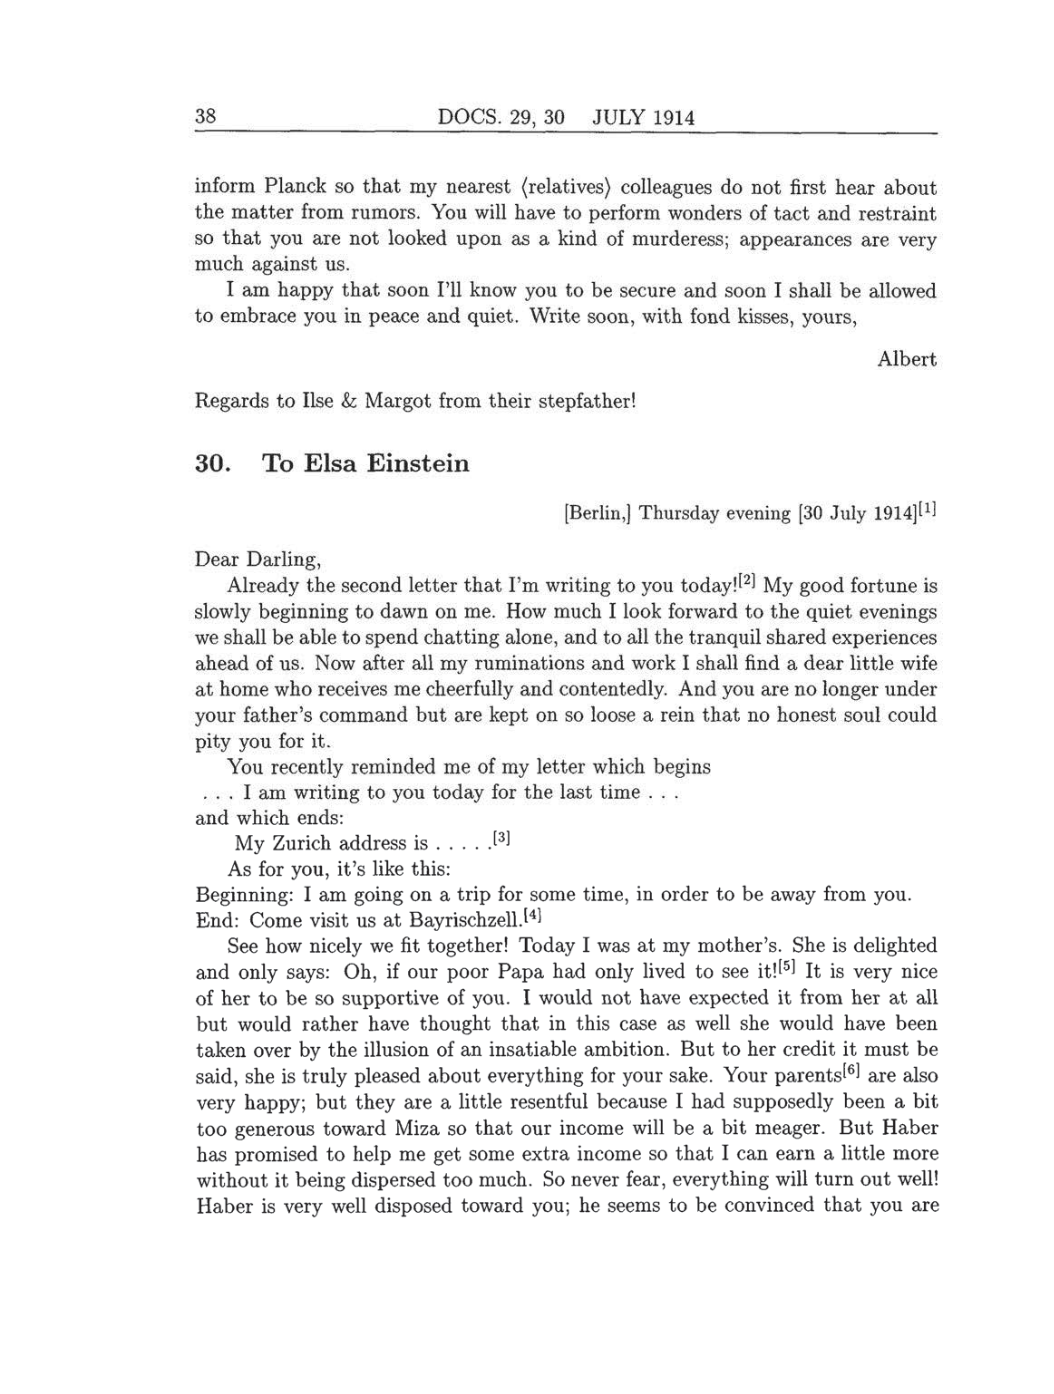 Volume 8: The Berlin Years: Correspondence, 1914-1918 (English translation supplement) page 38